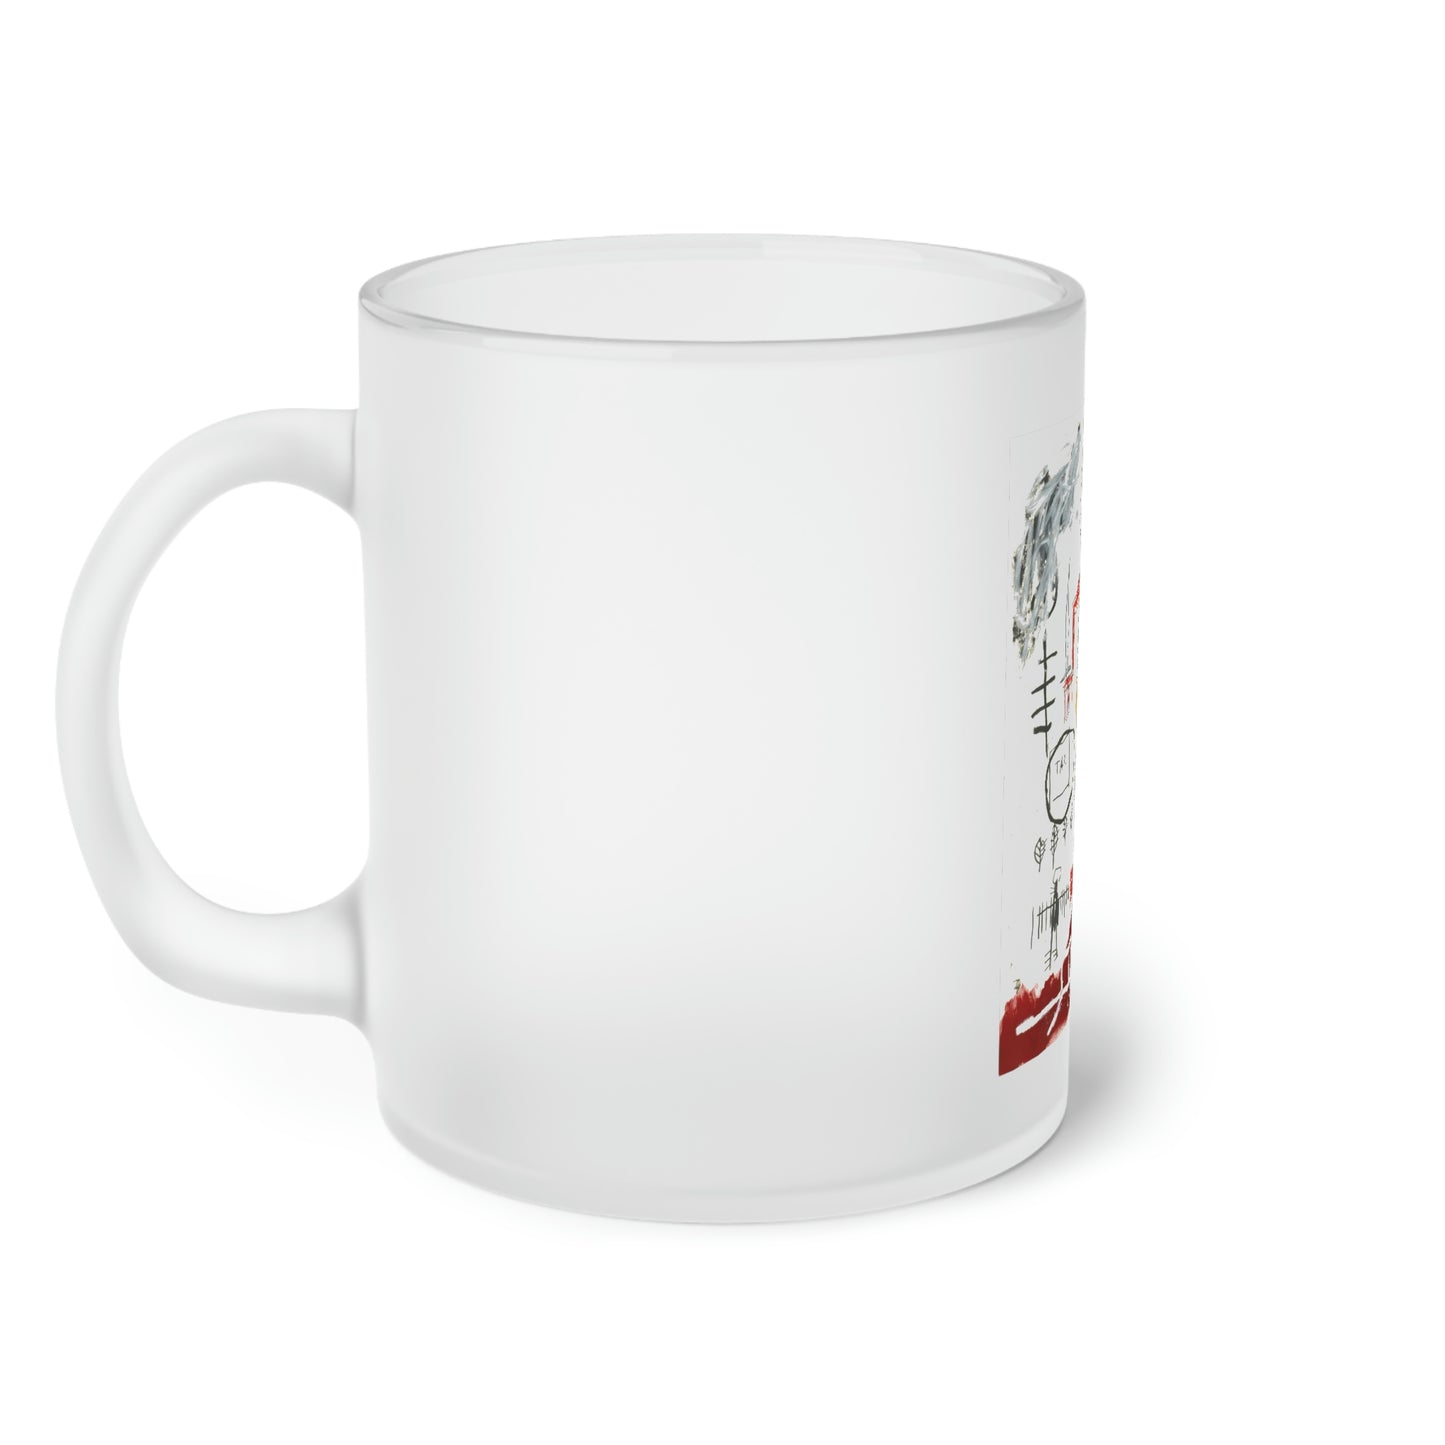 Jean-Michel Basquiat "Untitled" Frosted Glass Mug